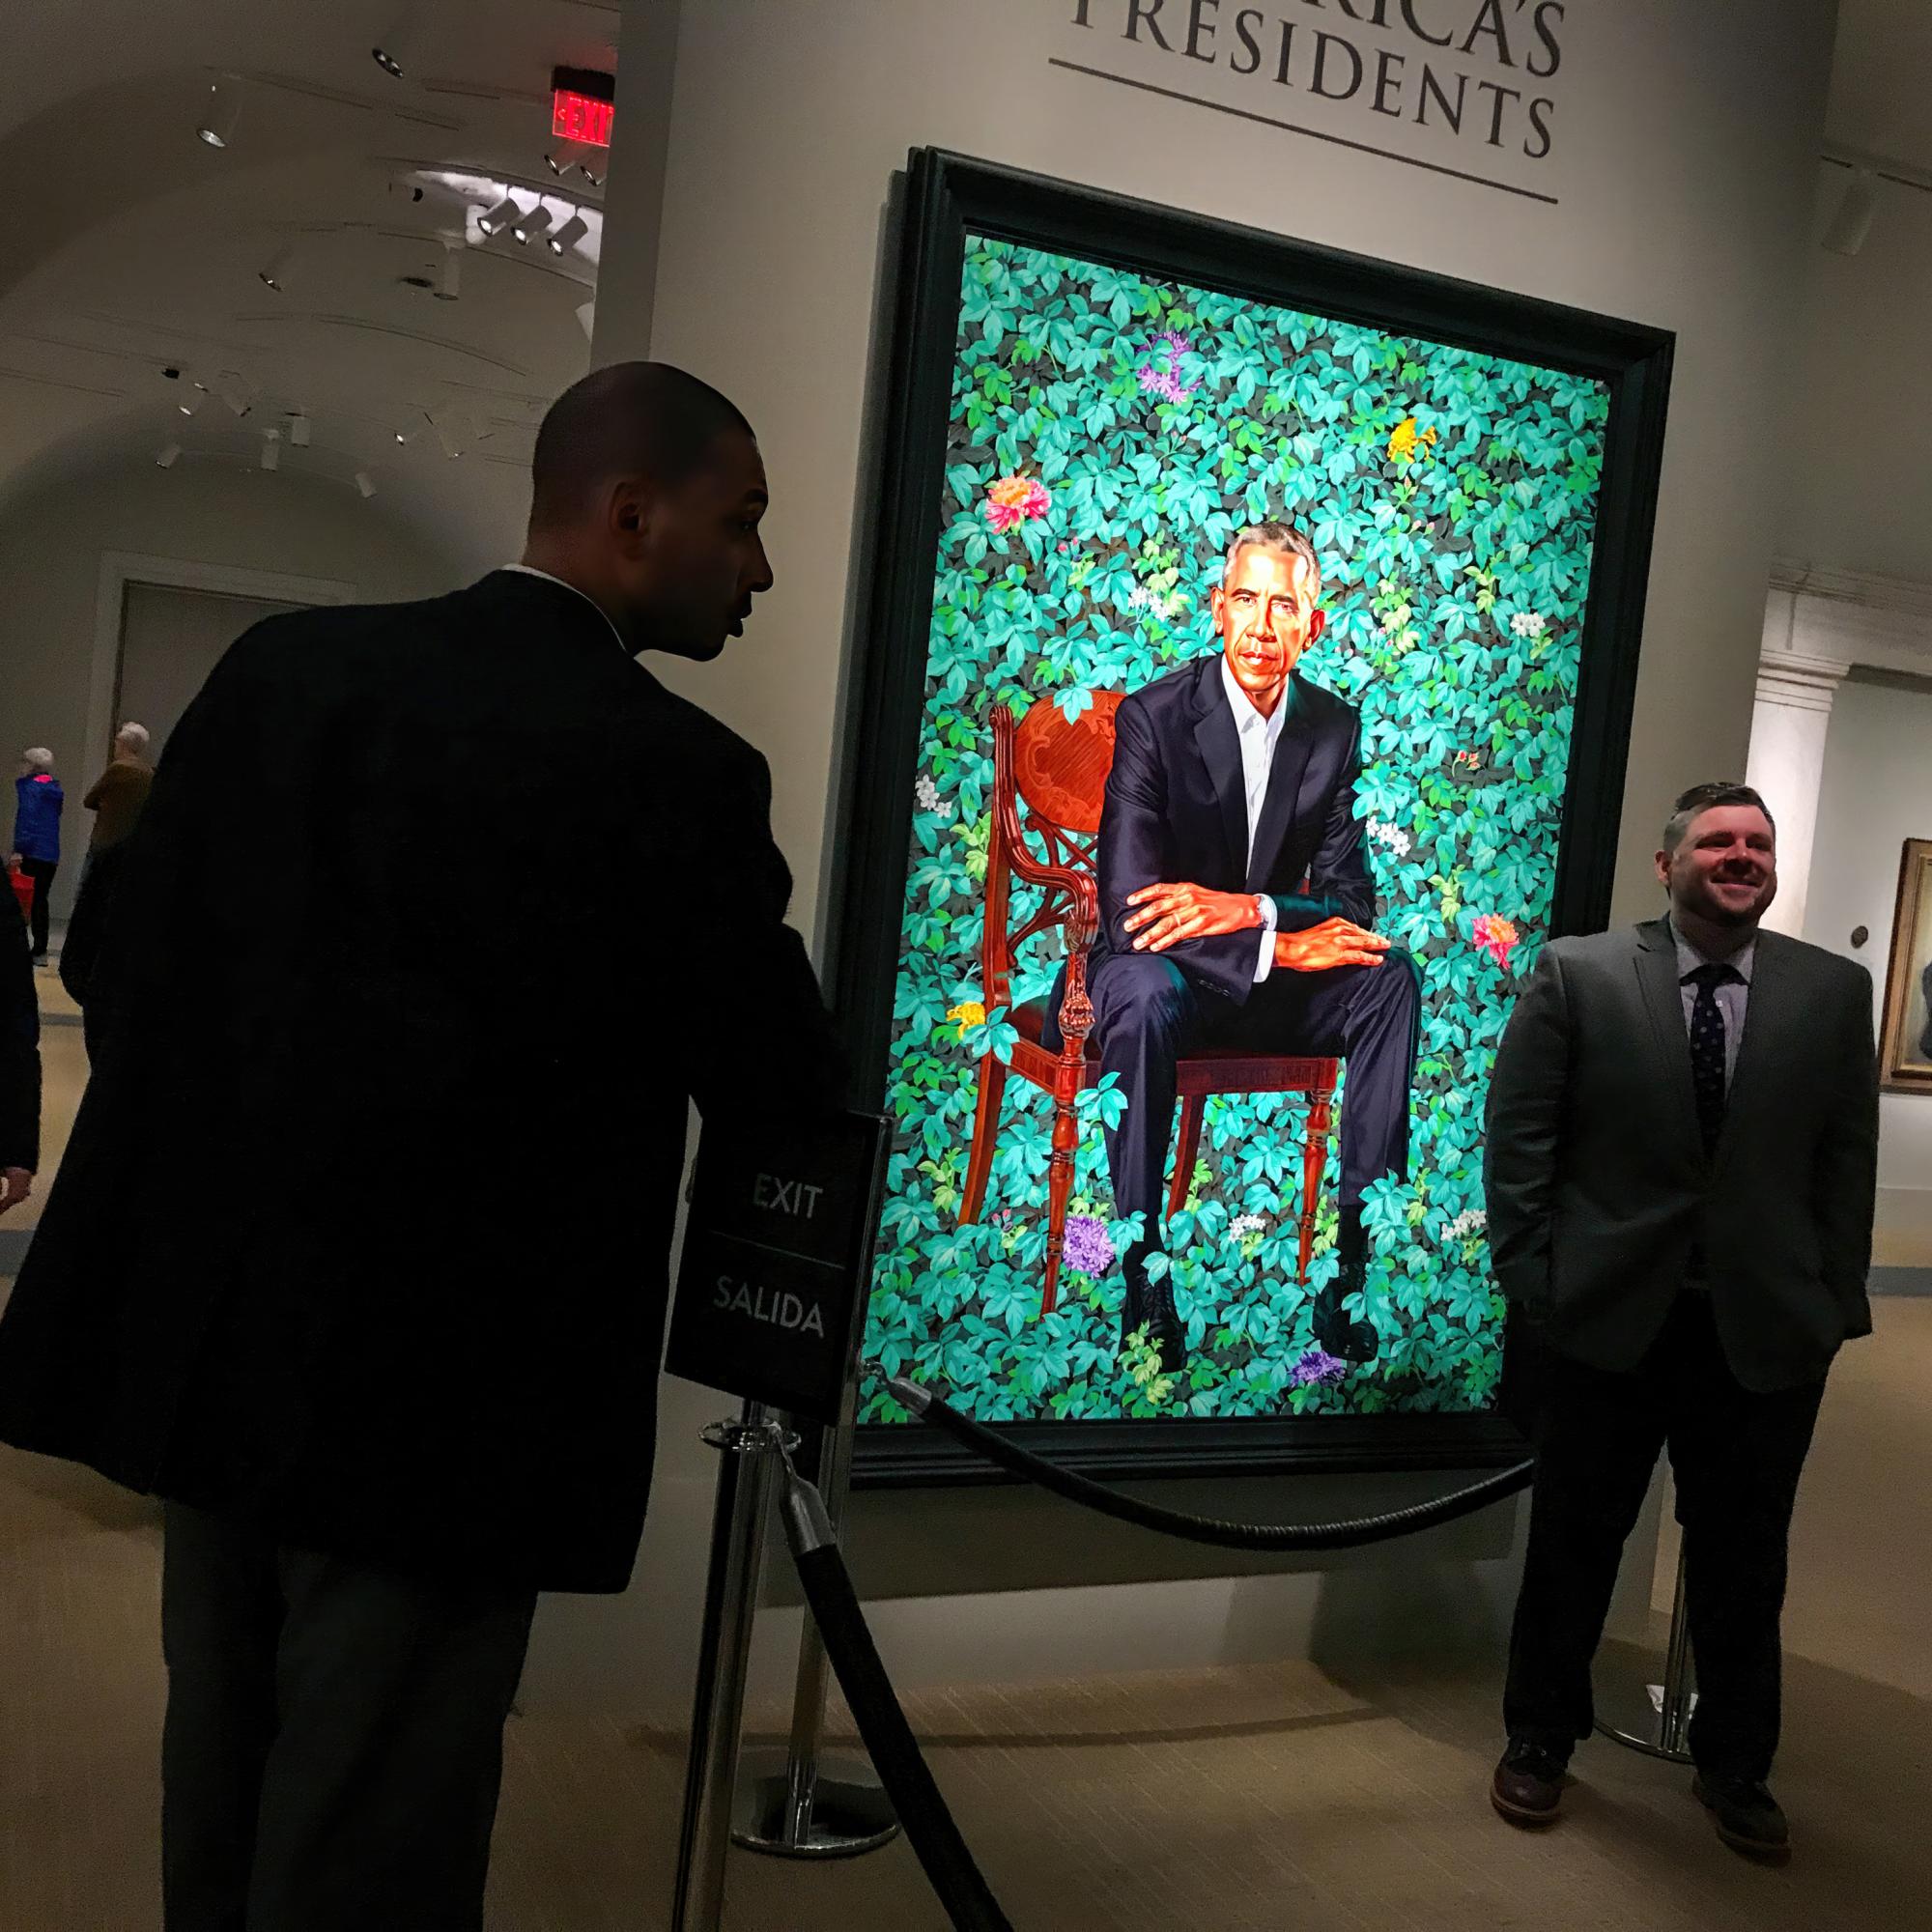 Viewing Art - Portrait of President Obama by Kehinde Wiley at the...